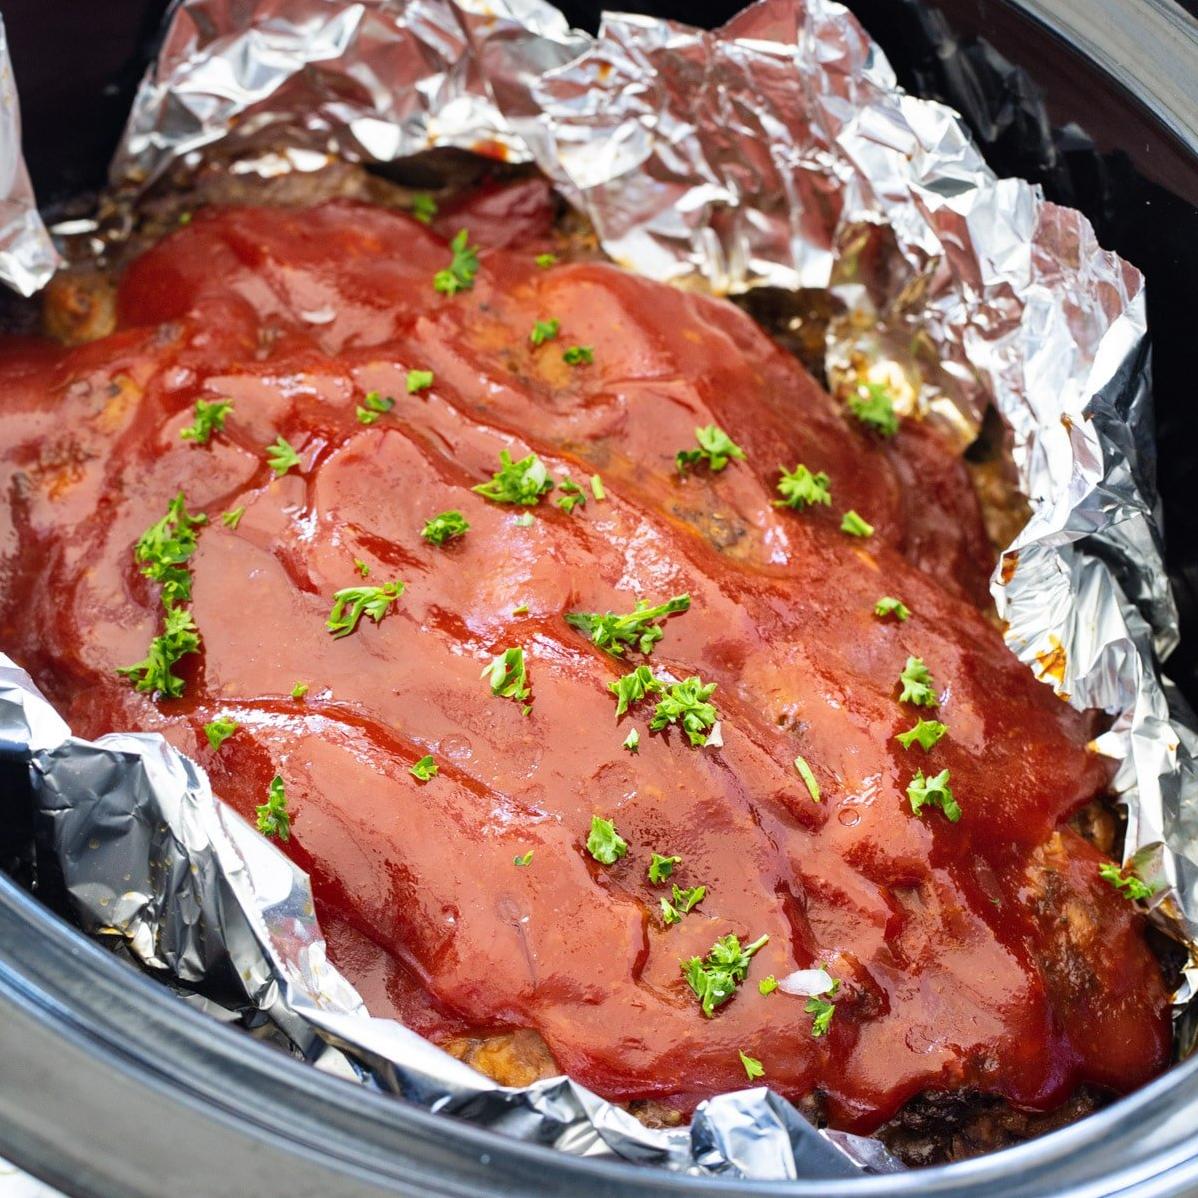 Sure! Here are some photo caption ideas for your Southern Crock Pot Meatloaf recipe: